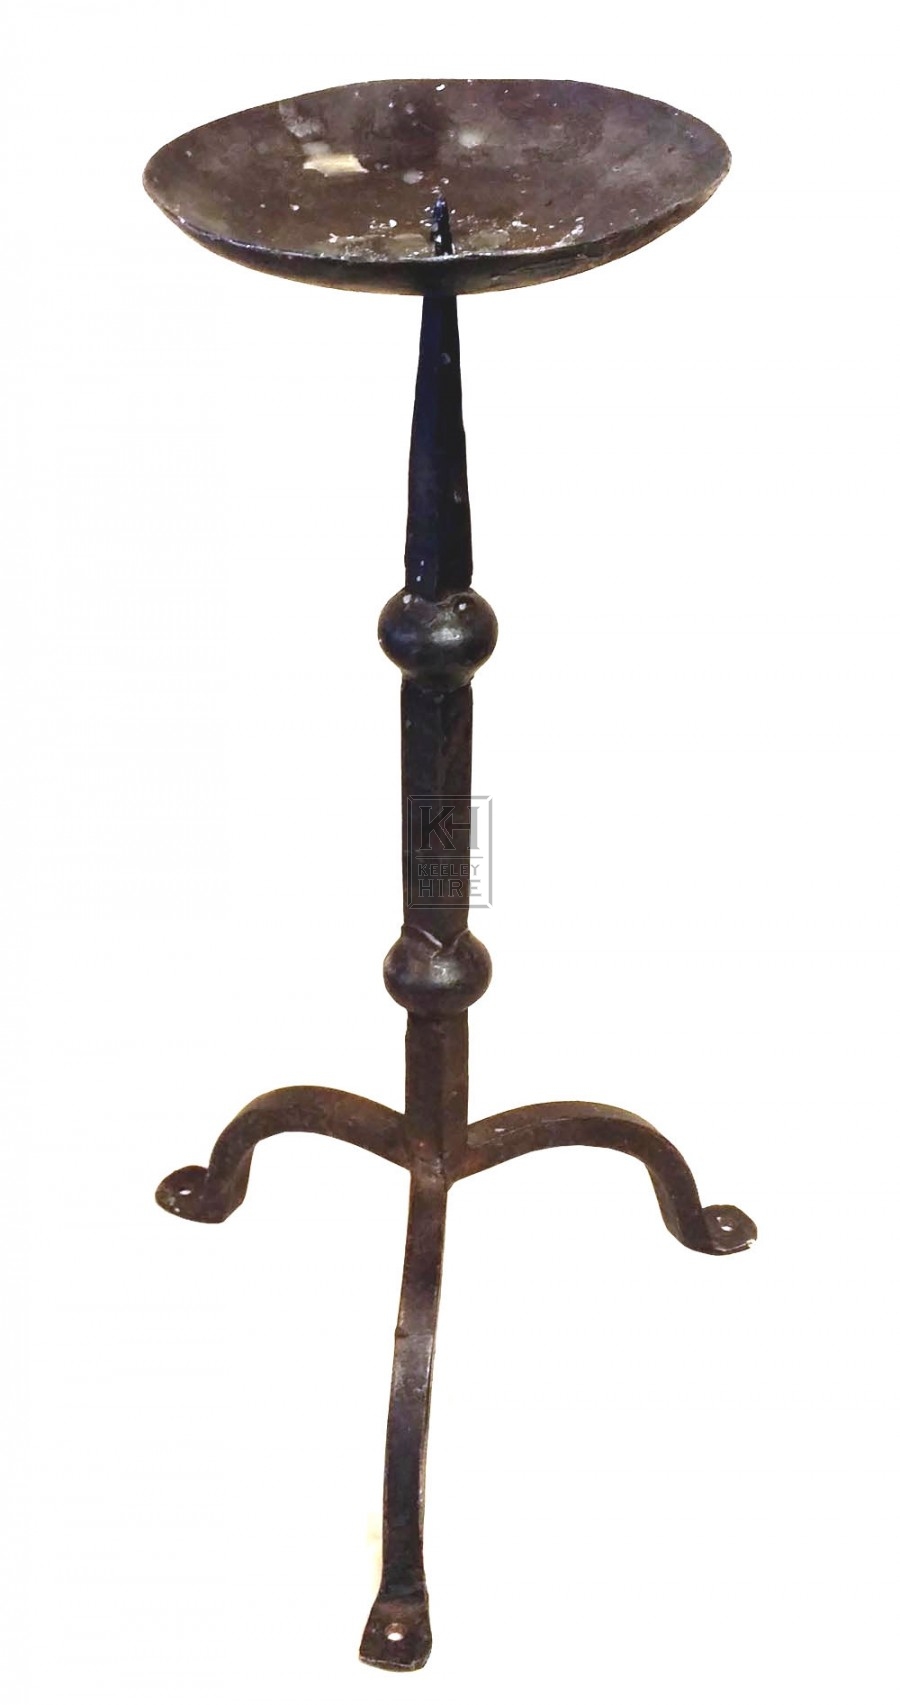 Iron candlestick with point and 3 legs